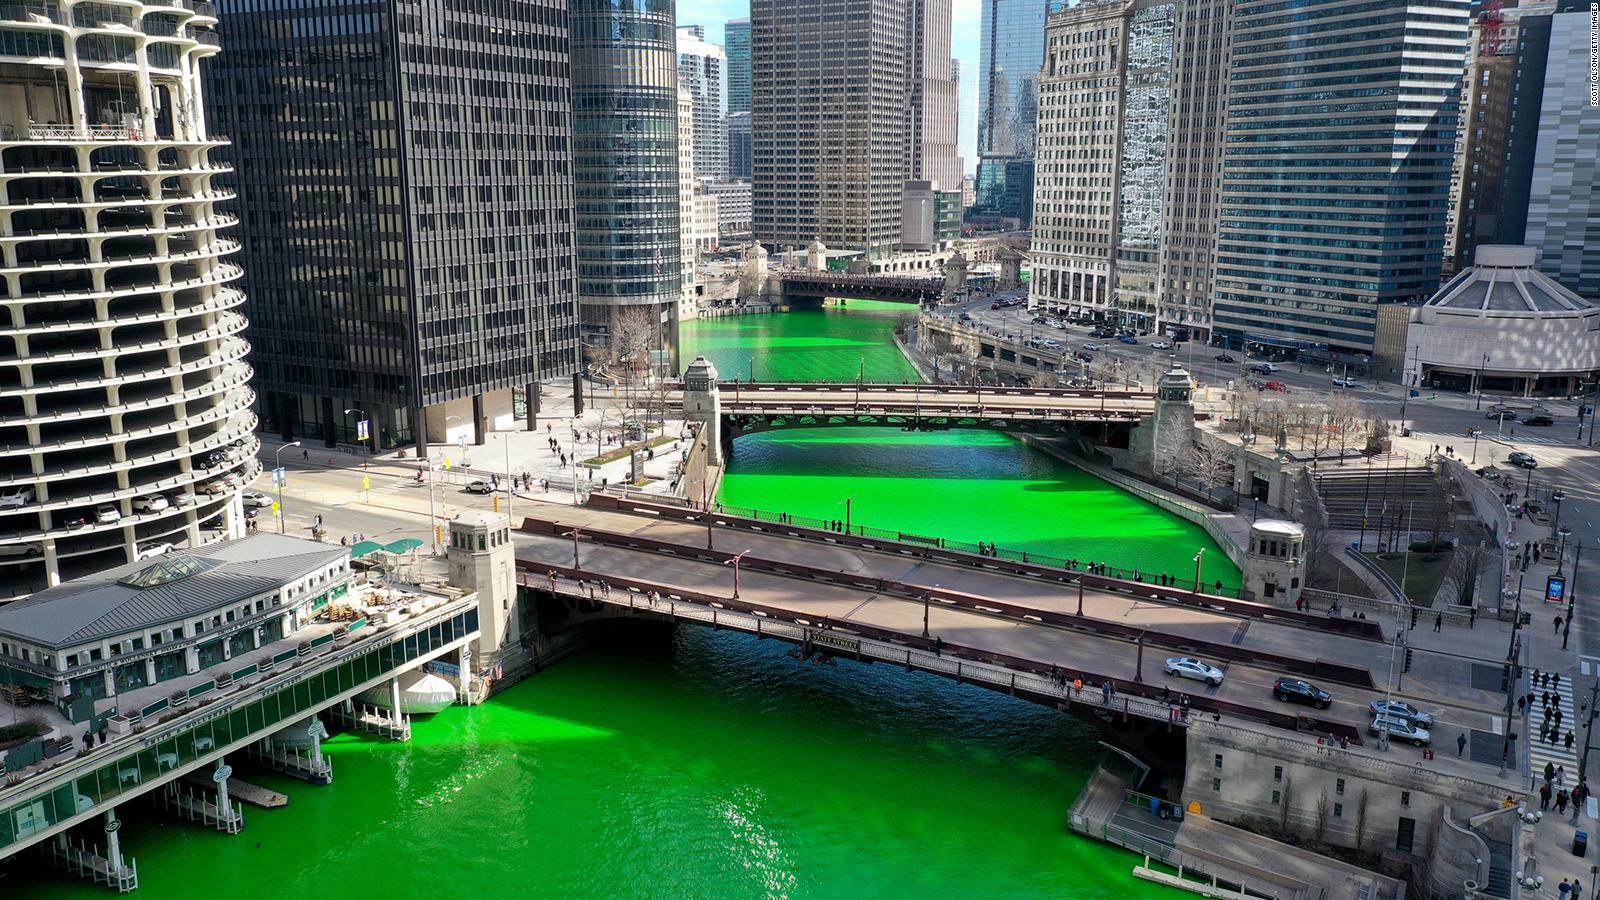 Chicago surprises city with the traditional green river for St. Patrick ...